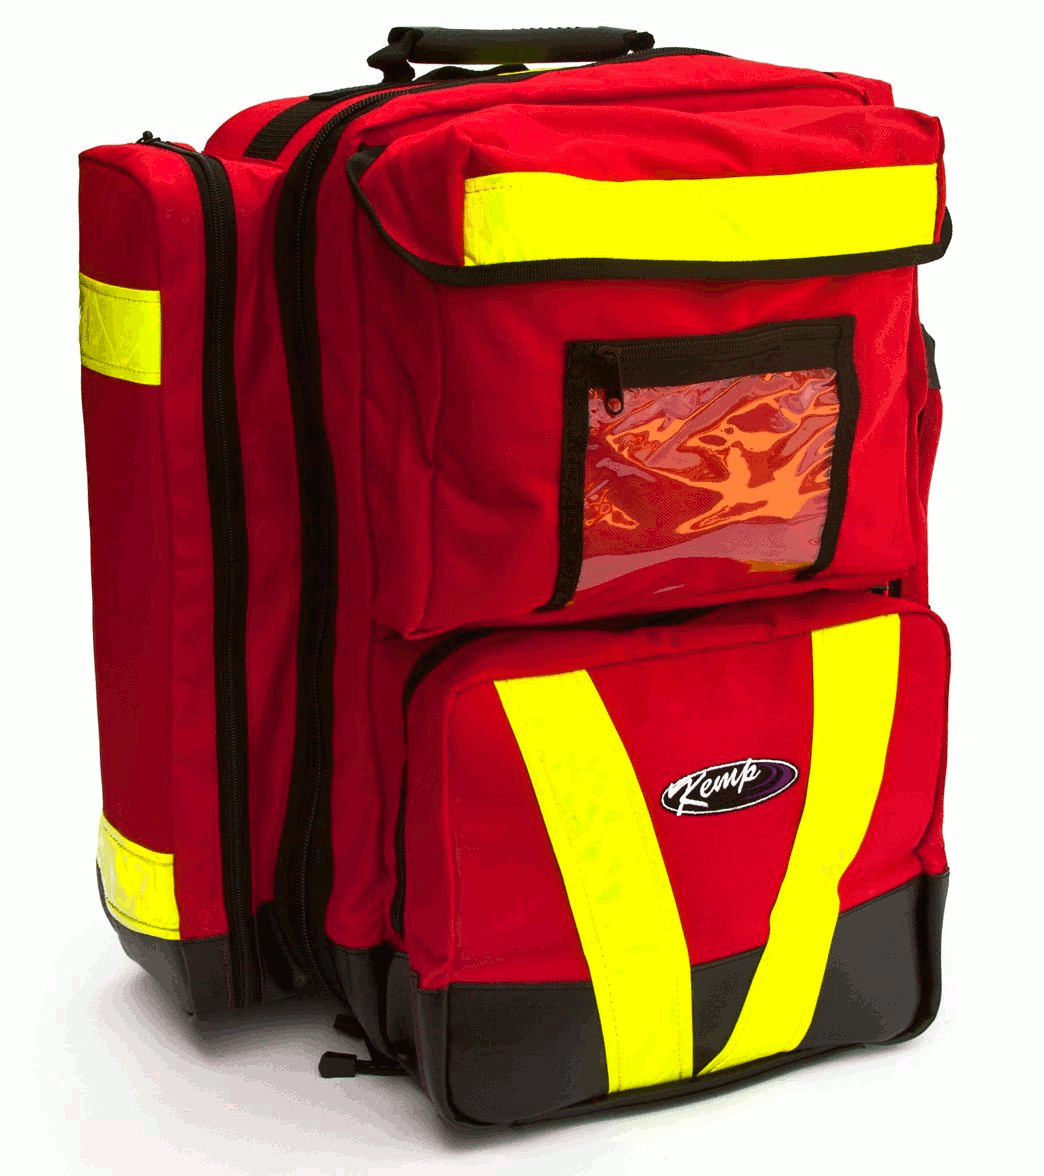 Kemp USA Red Ultimate EMS Backpack - Red $232.00/EA Kemp USA 10-115-RED